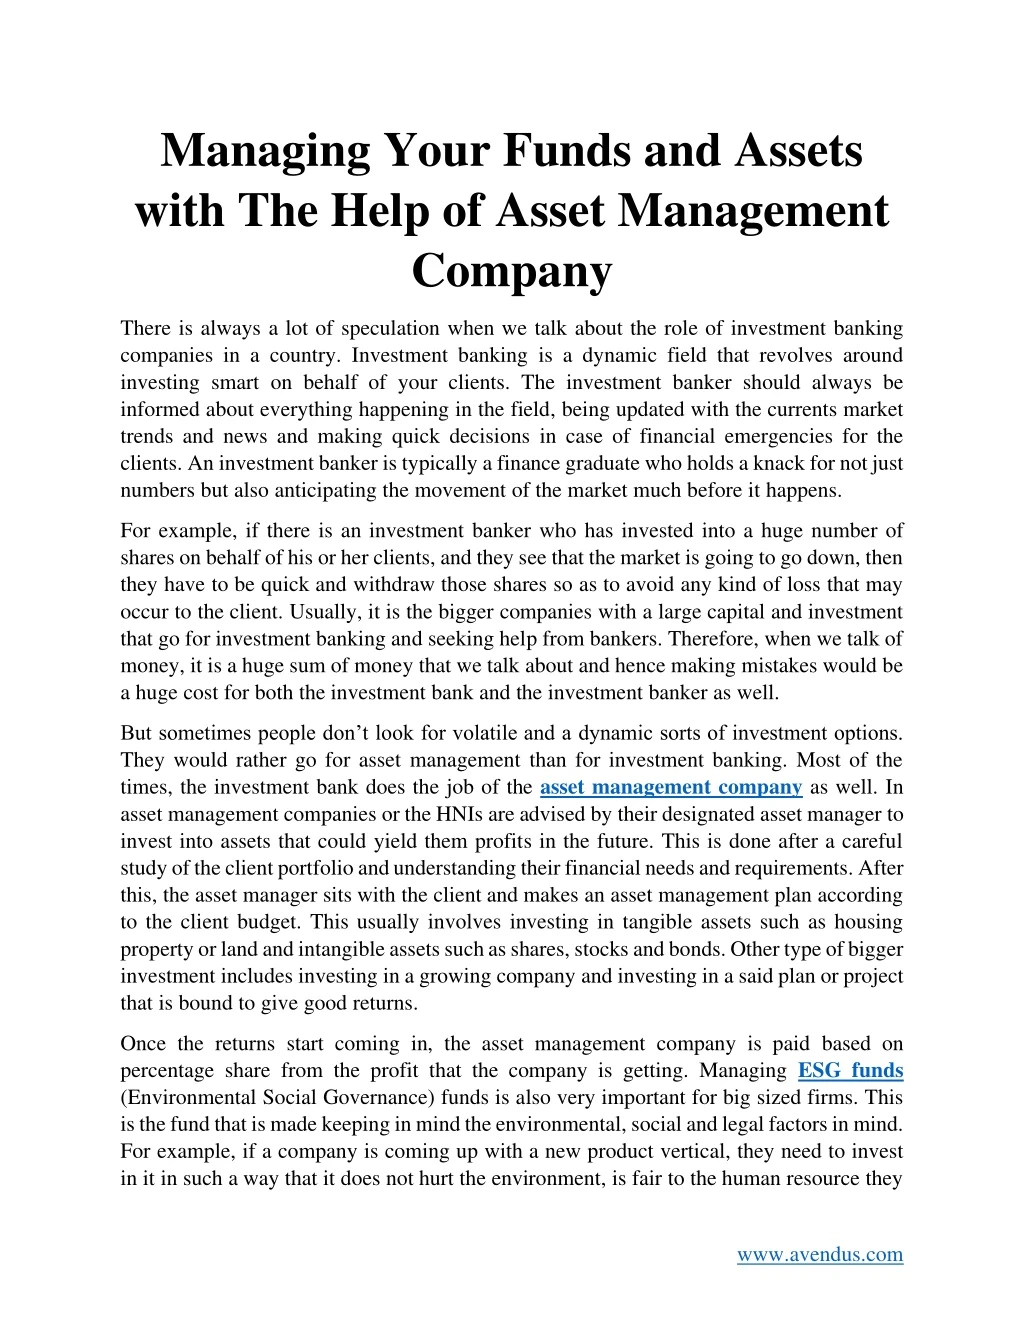 managing your funds and assets with the help